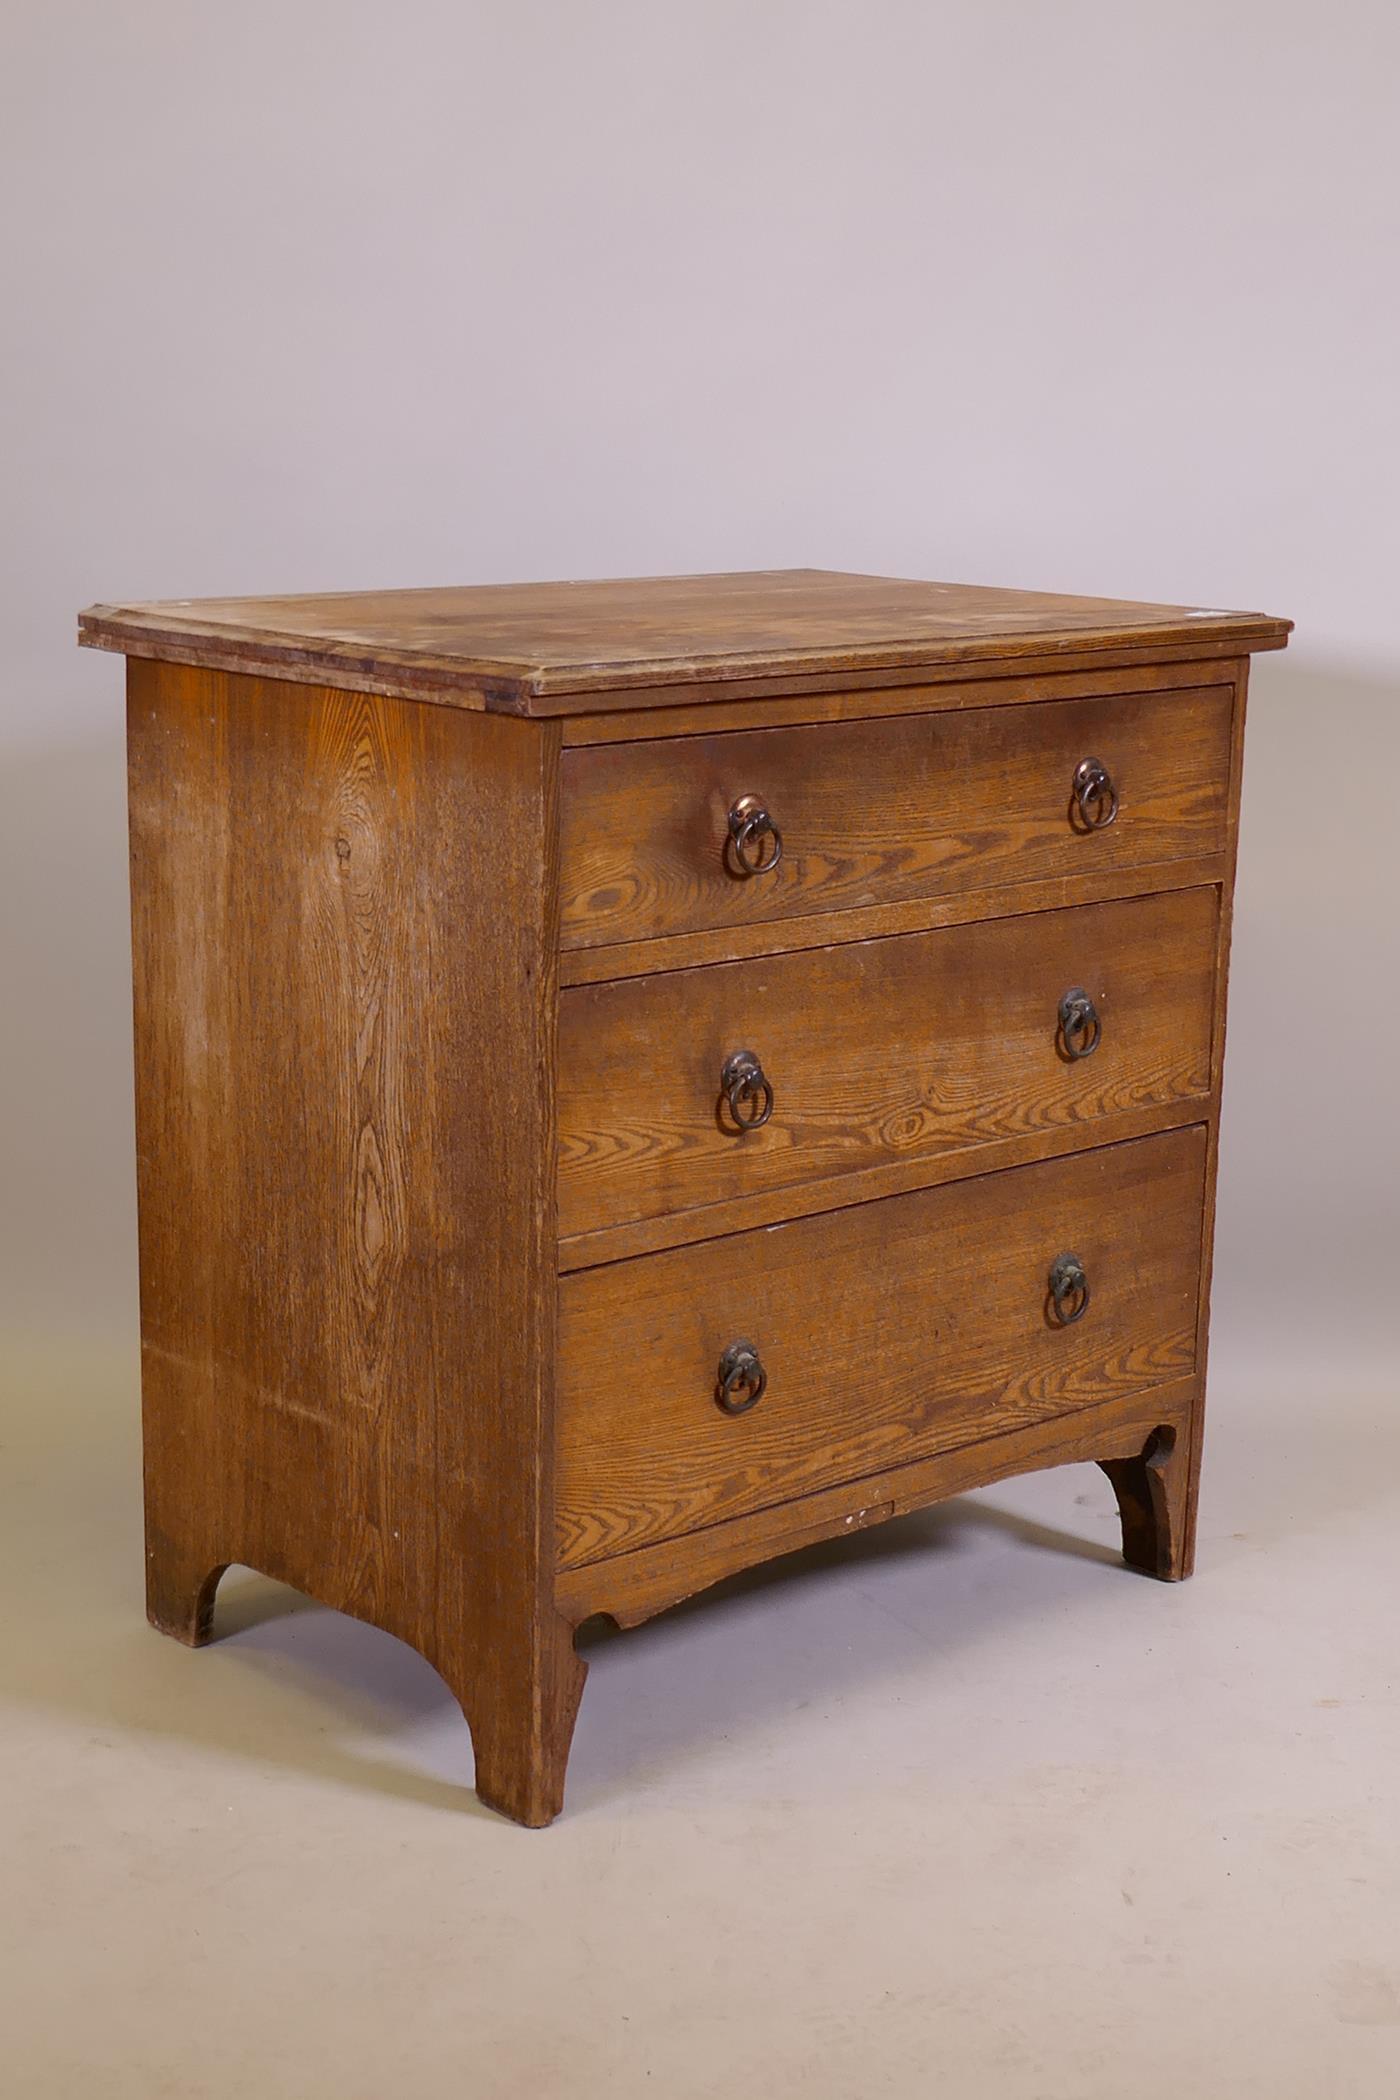 An Arts & Crafts oak three drawer chest, raised on shaped supports, 74 x 49 x 77cm